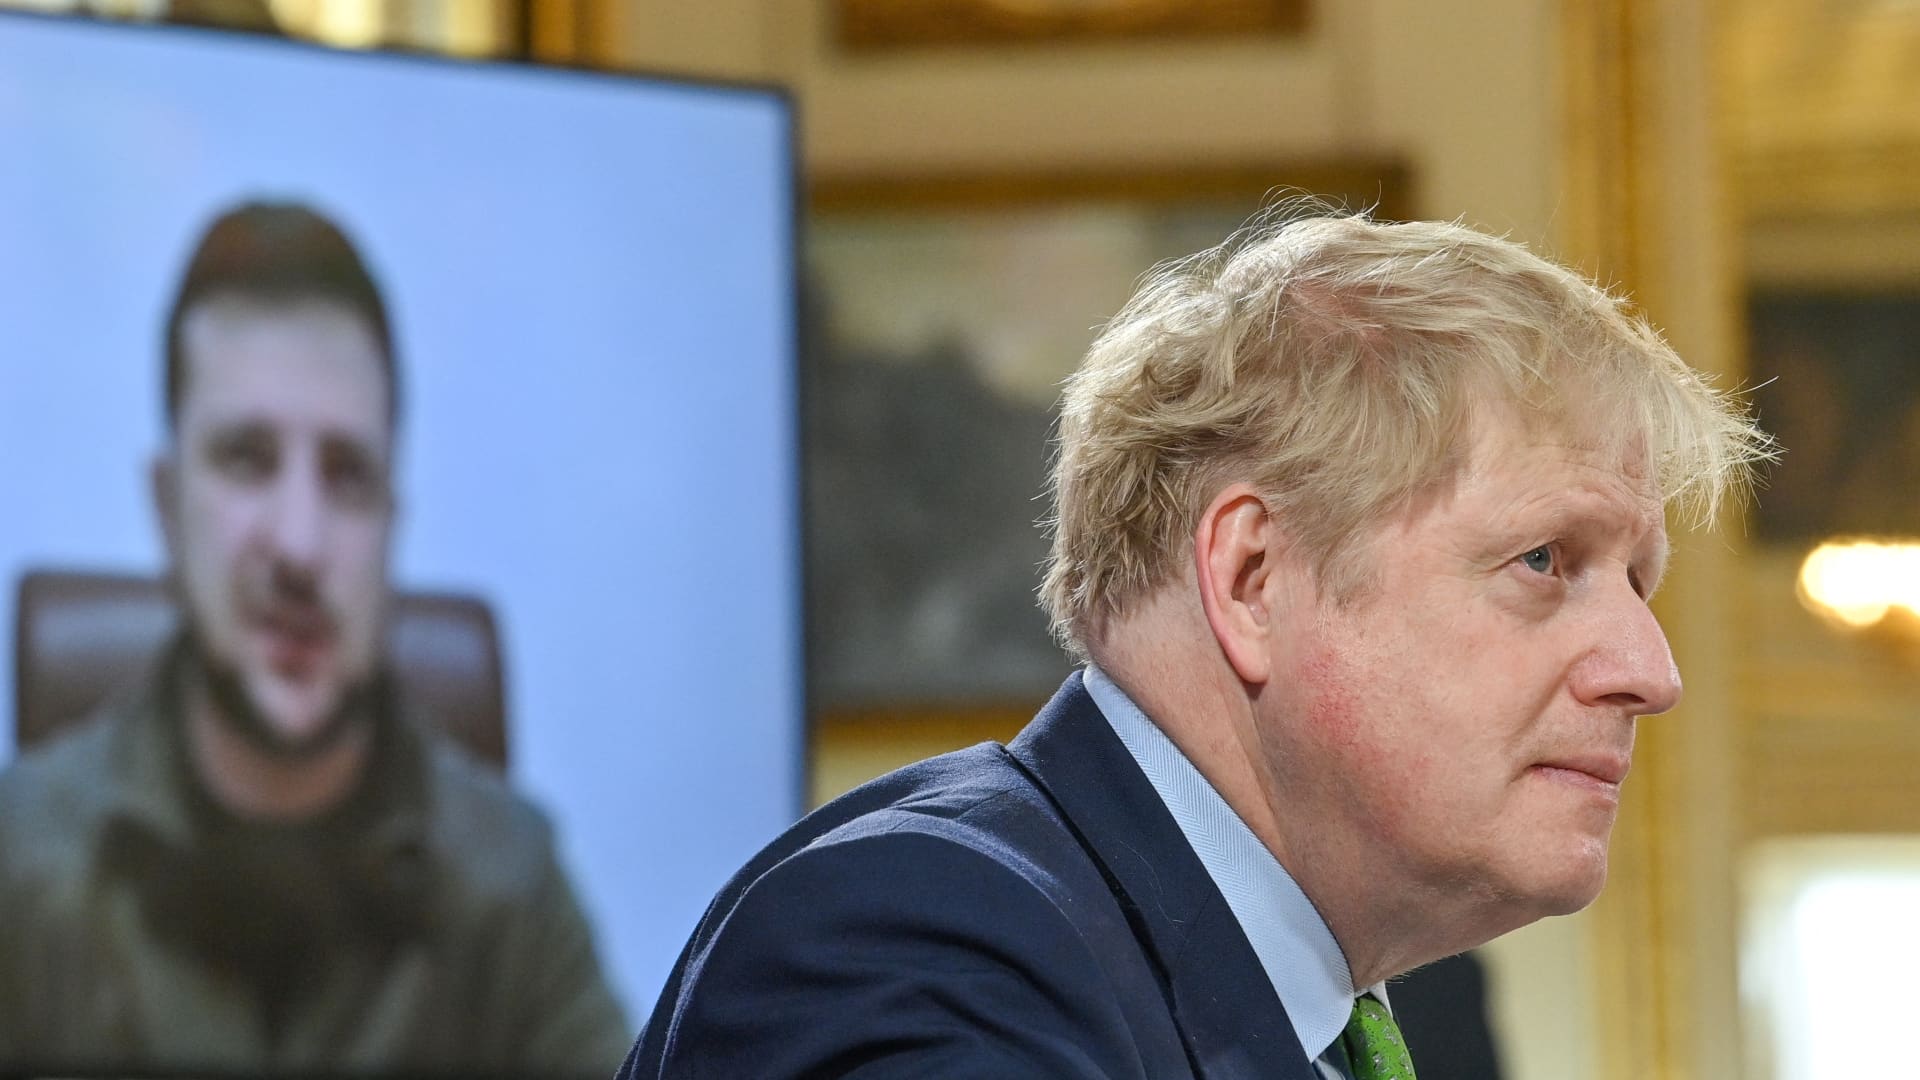 Russia cheers Boris Johnson's demise as the world reacts to Britain's political drama